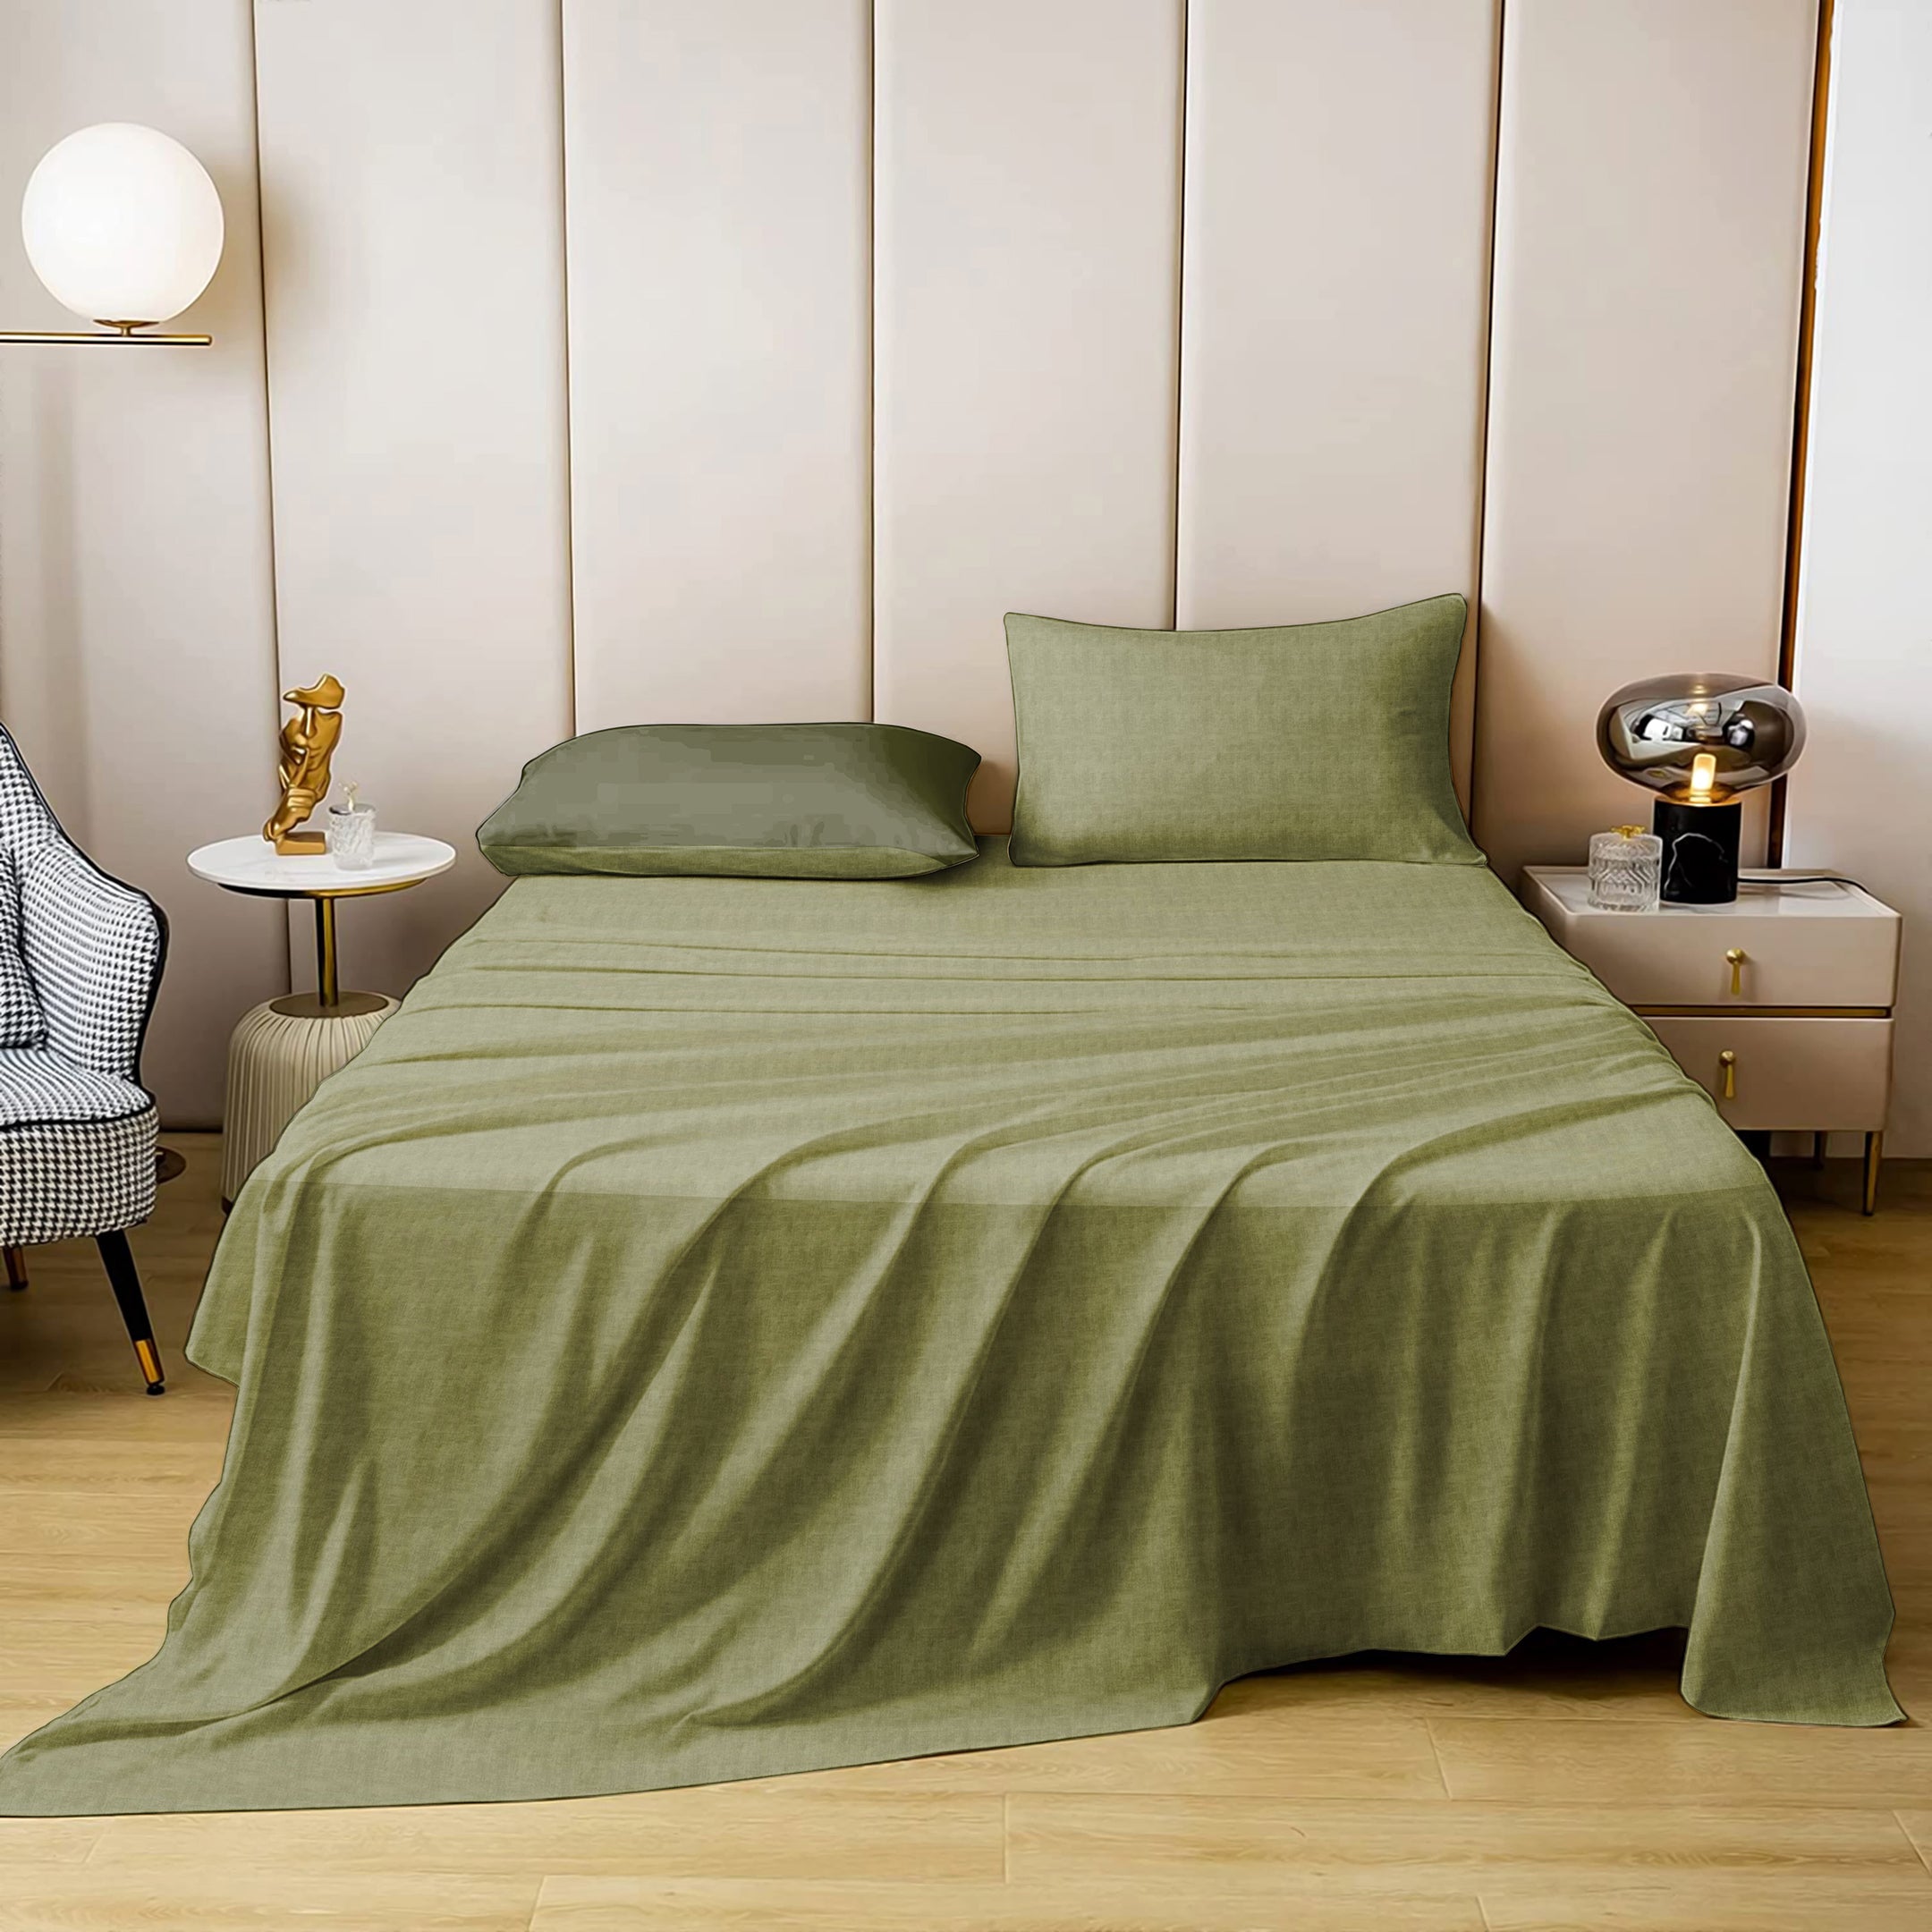 Jodhpur Texture Bedsheet for Double Bed with 2 PillowCovers King Size (104" X 90") Olive